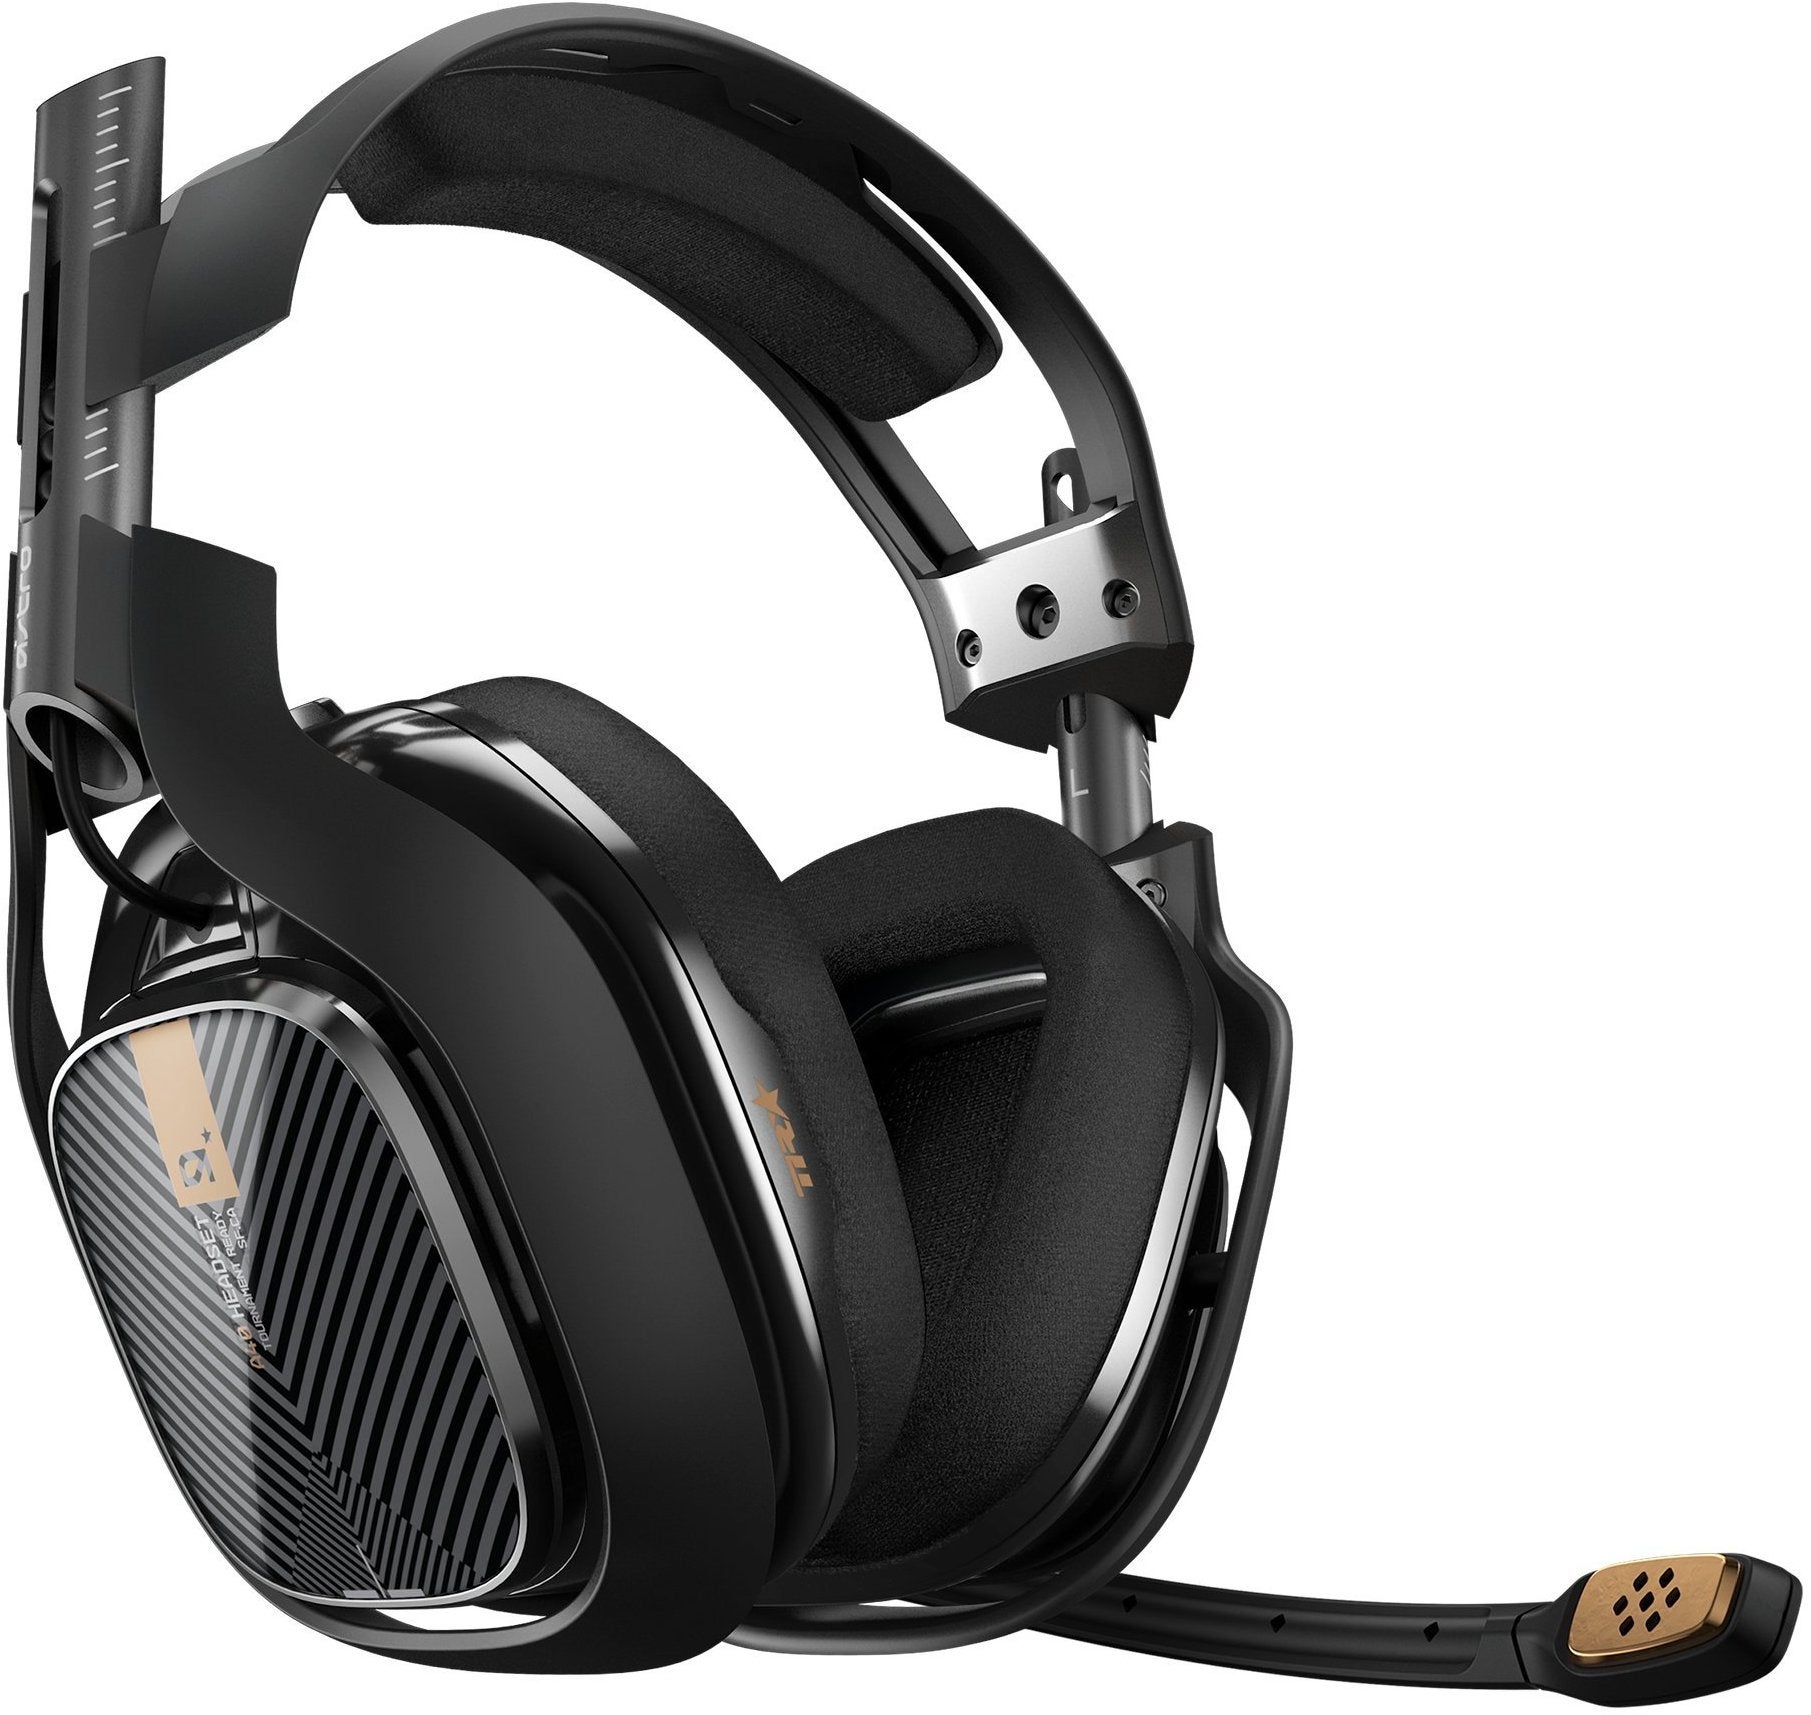 Image for The Astro A40 TR Gaming Headset Is down to Its Lowest Ever Price